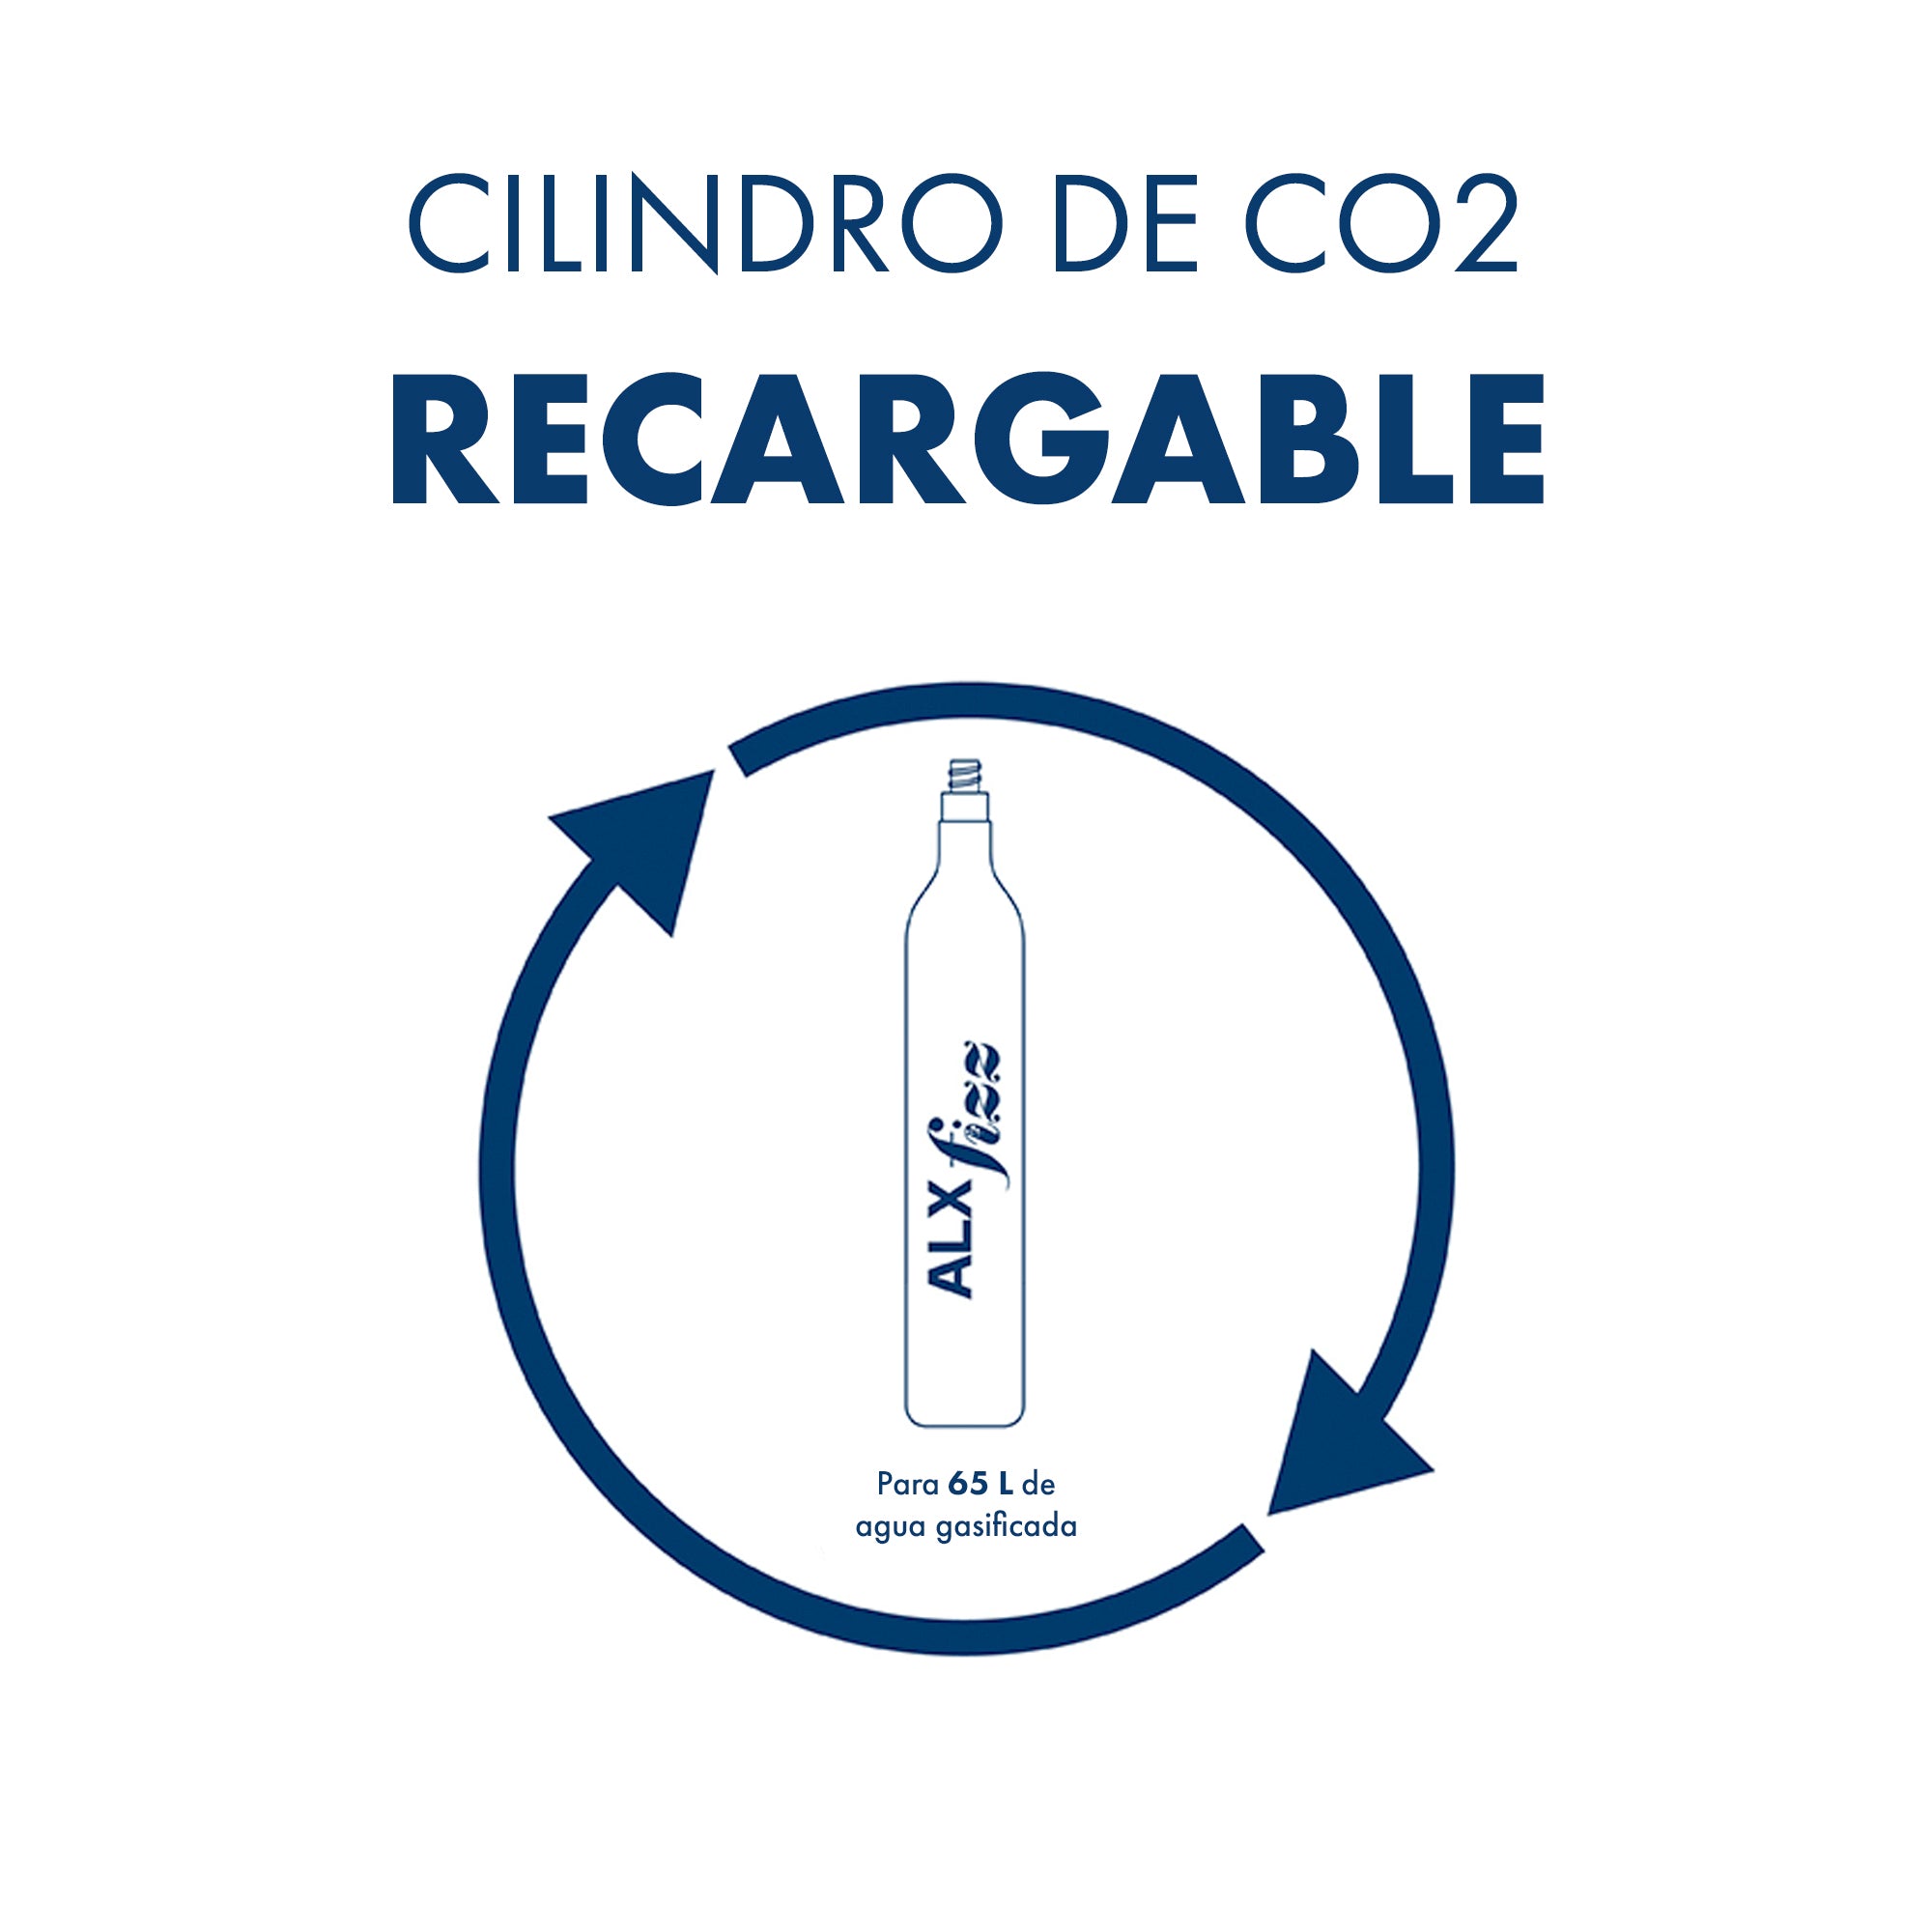 Graphic of a refillable CO2 cylinder with text promoting its use for carbonating water.